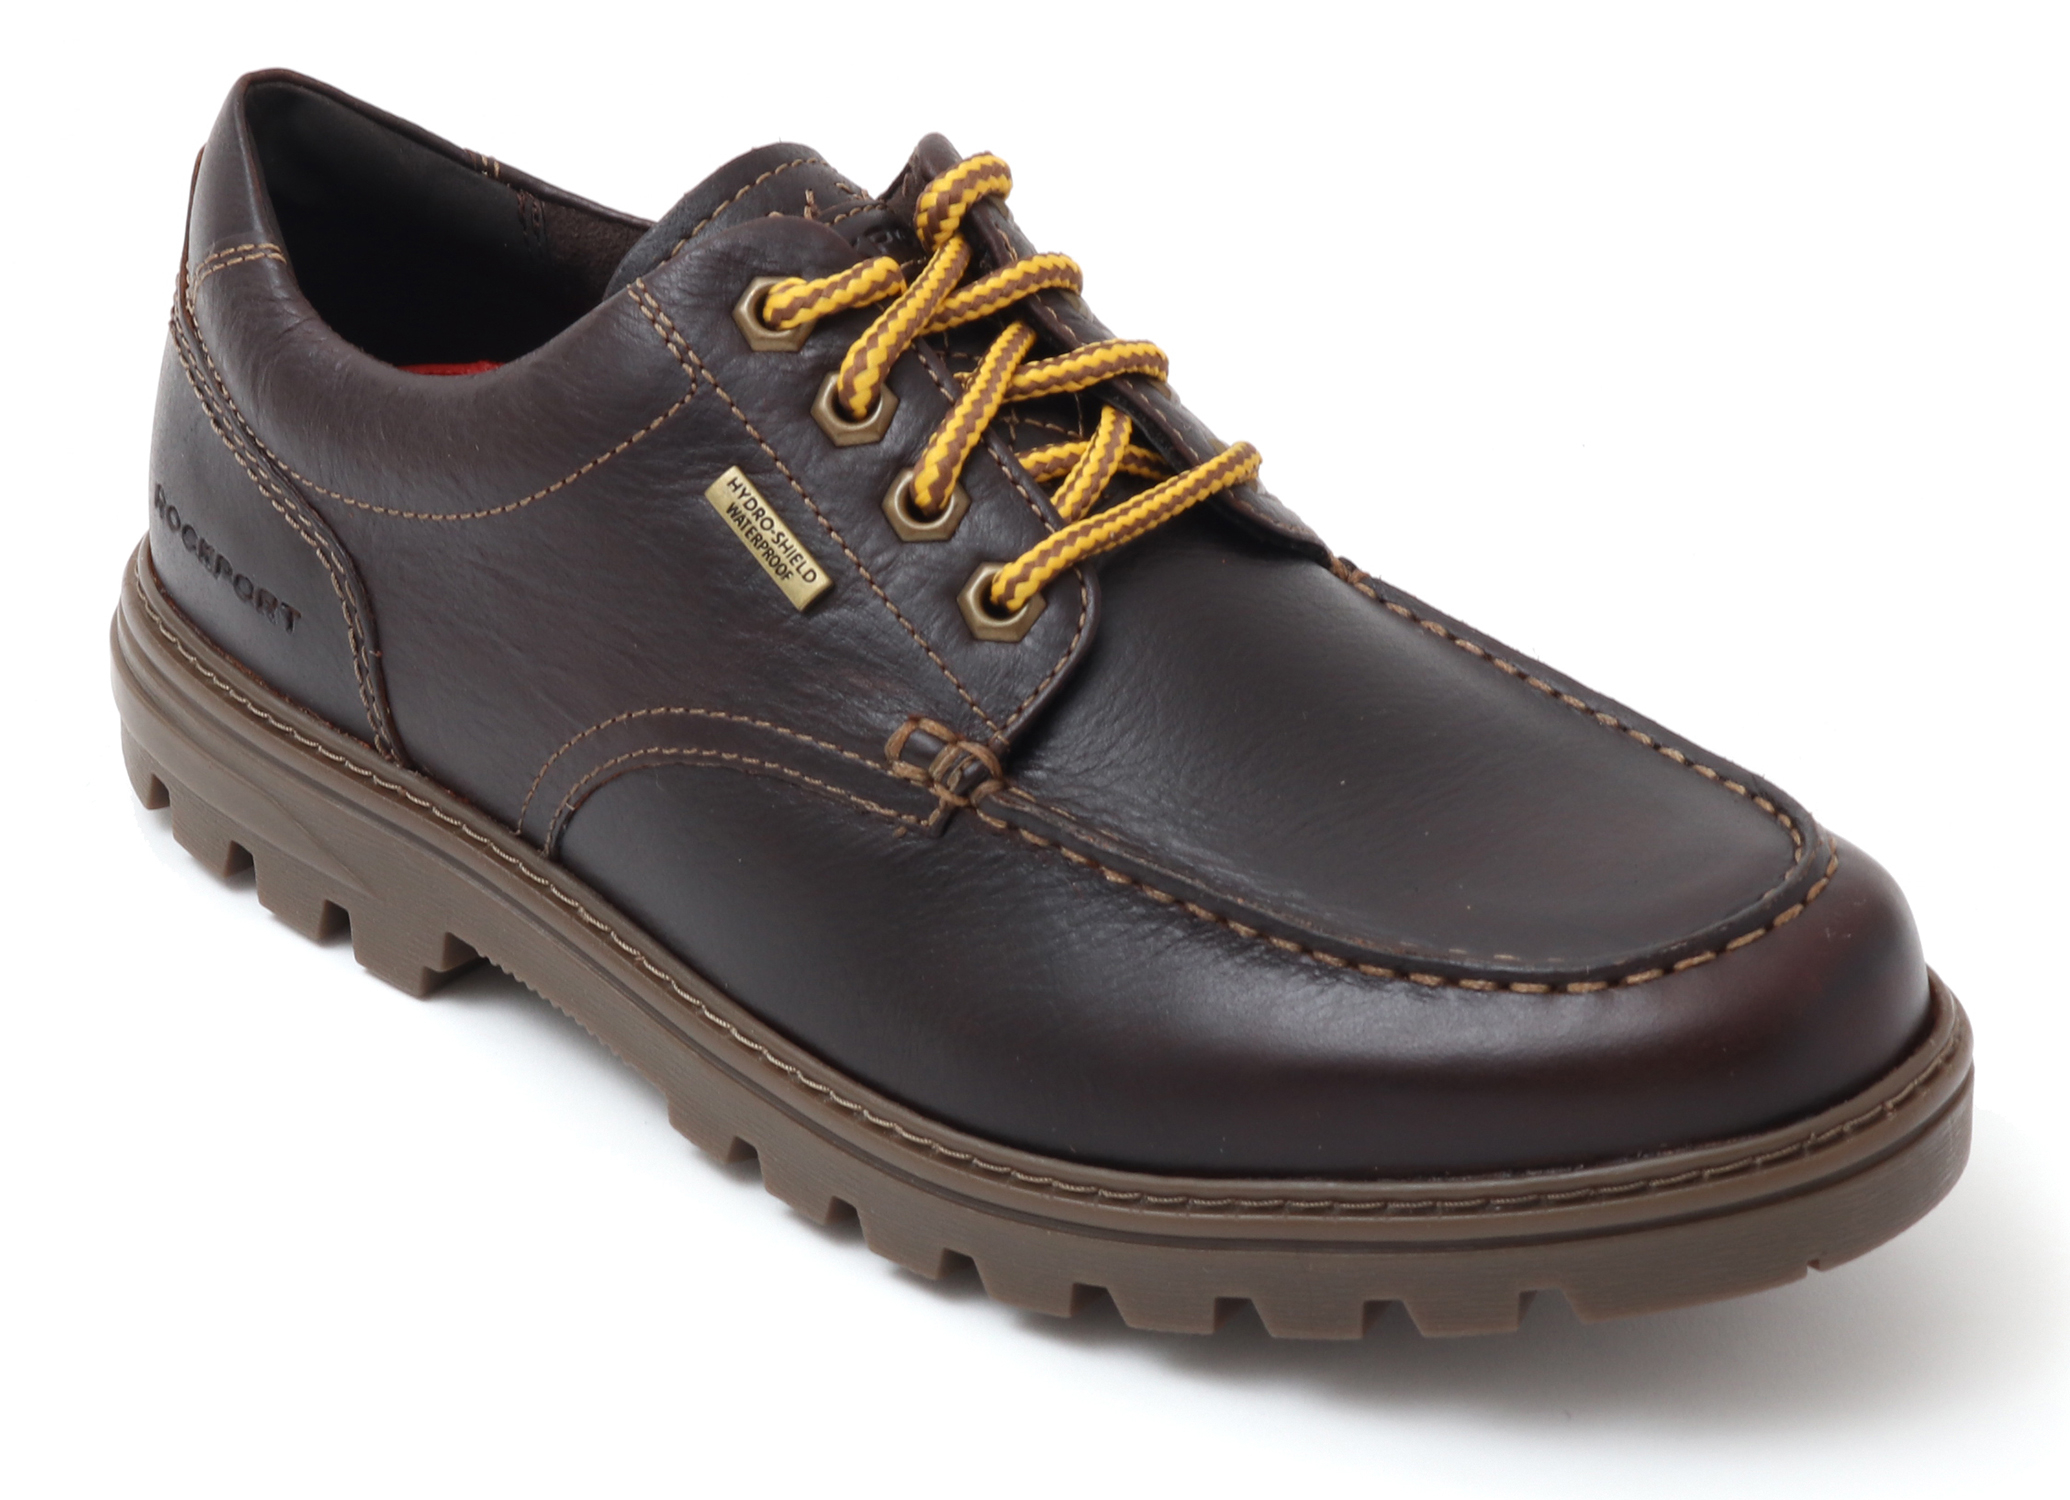 【ROCKPORT公式通販】WEATHER or Not MOC Oxford